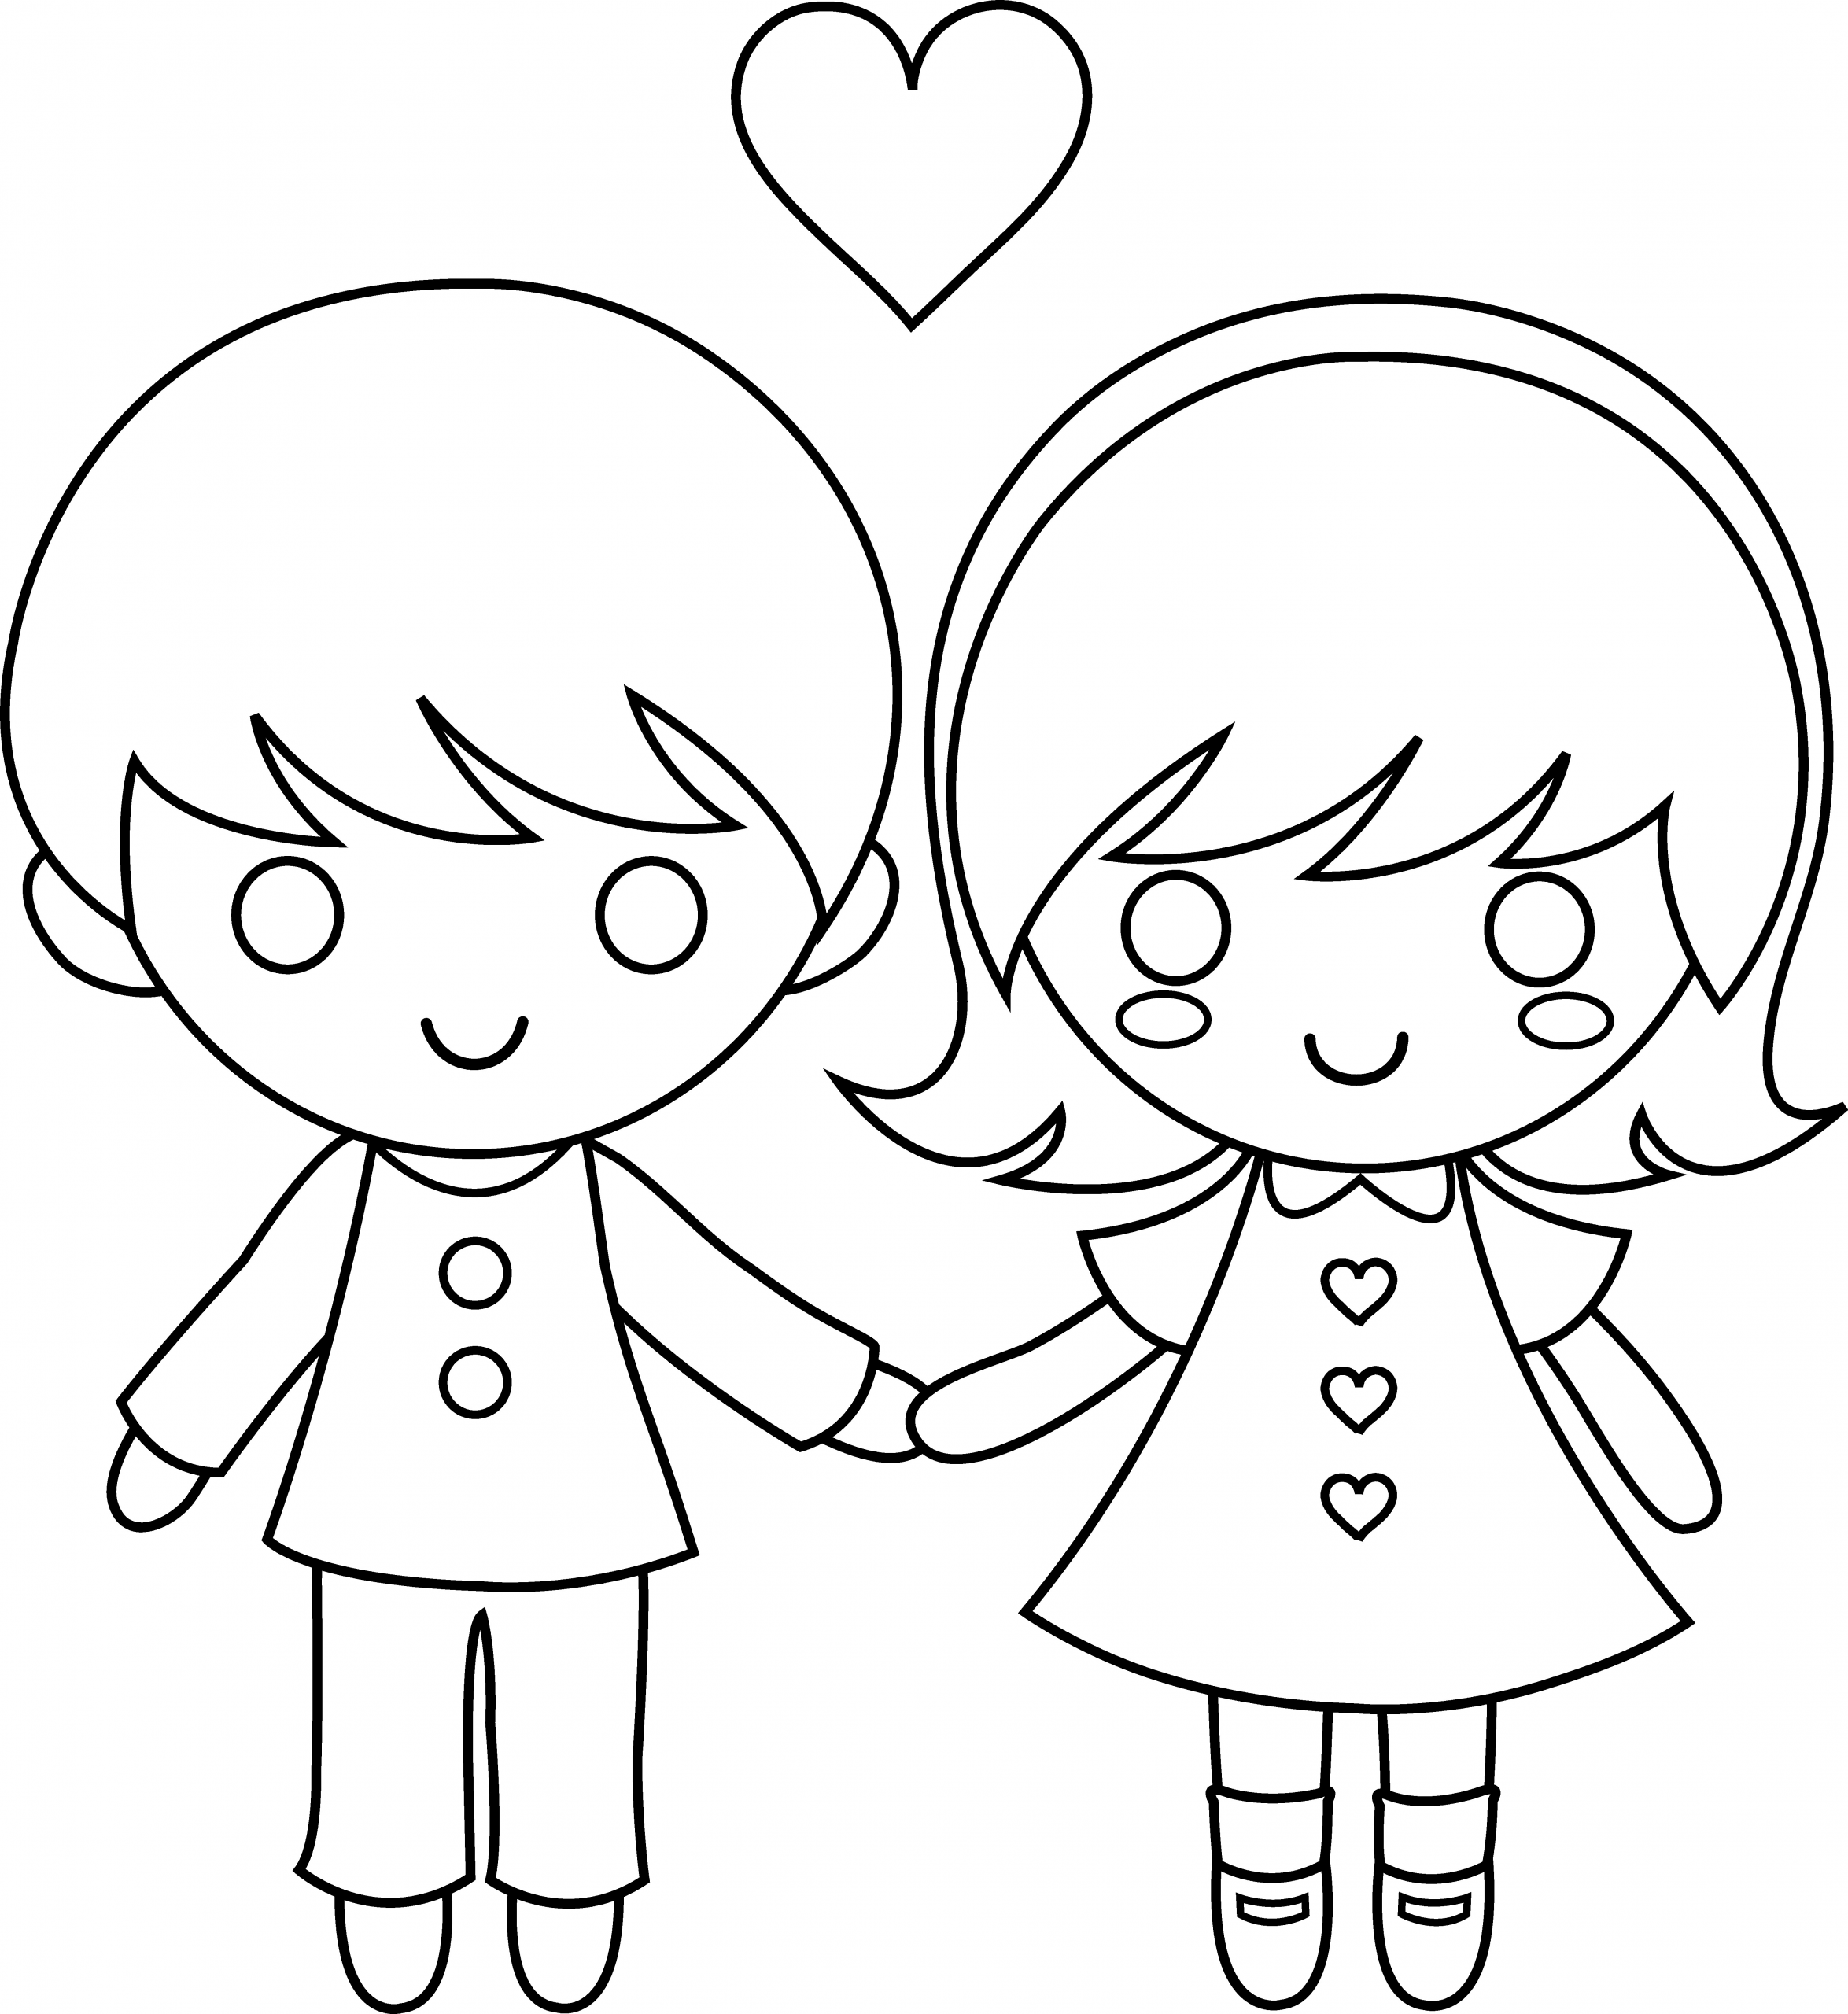 Easy Coloring Pages For Boys
 happy valentine s day clip art black and white